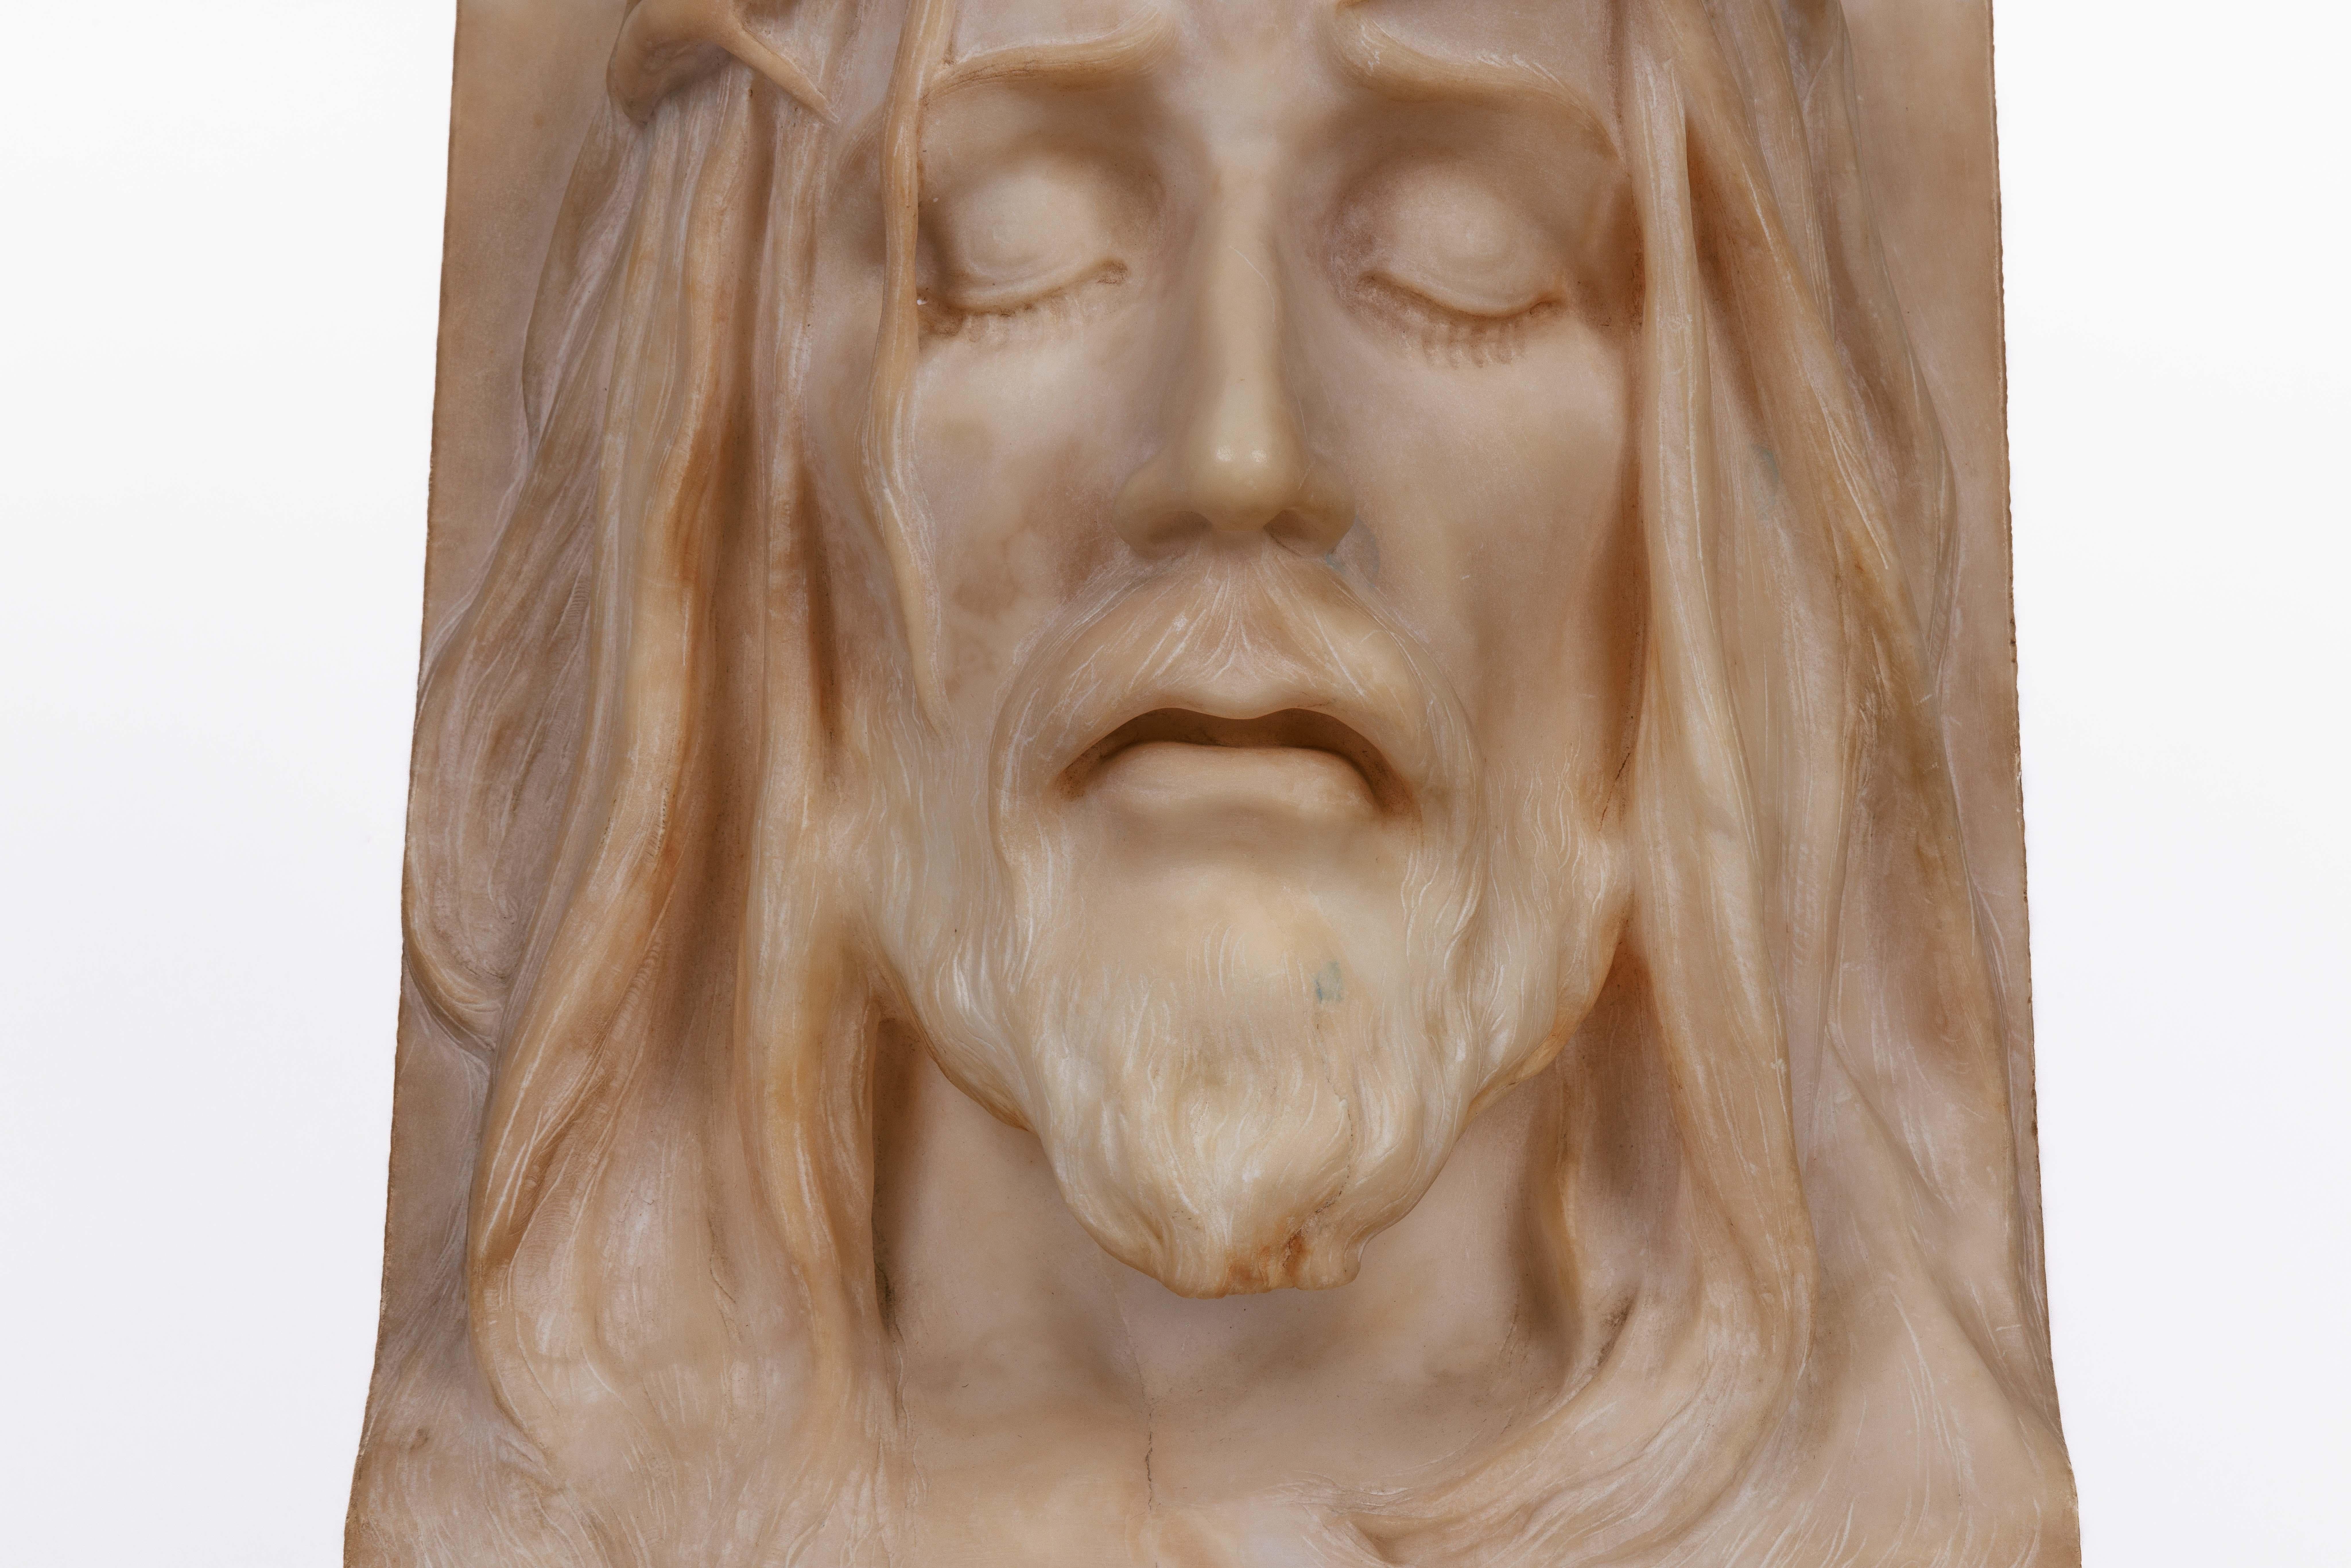 A rare and important Italian alabaster bust sculpture of Jesus Christ, C. 1860

A modeled bust of Holy Christ wearing a crown of thorns, exceptionally and realistically hand-carved in Rome in around 1860 inscribed 